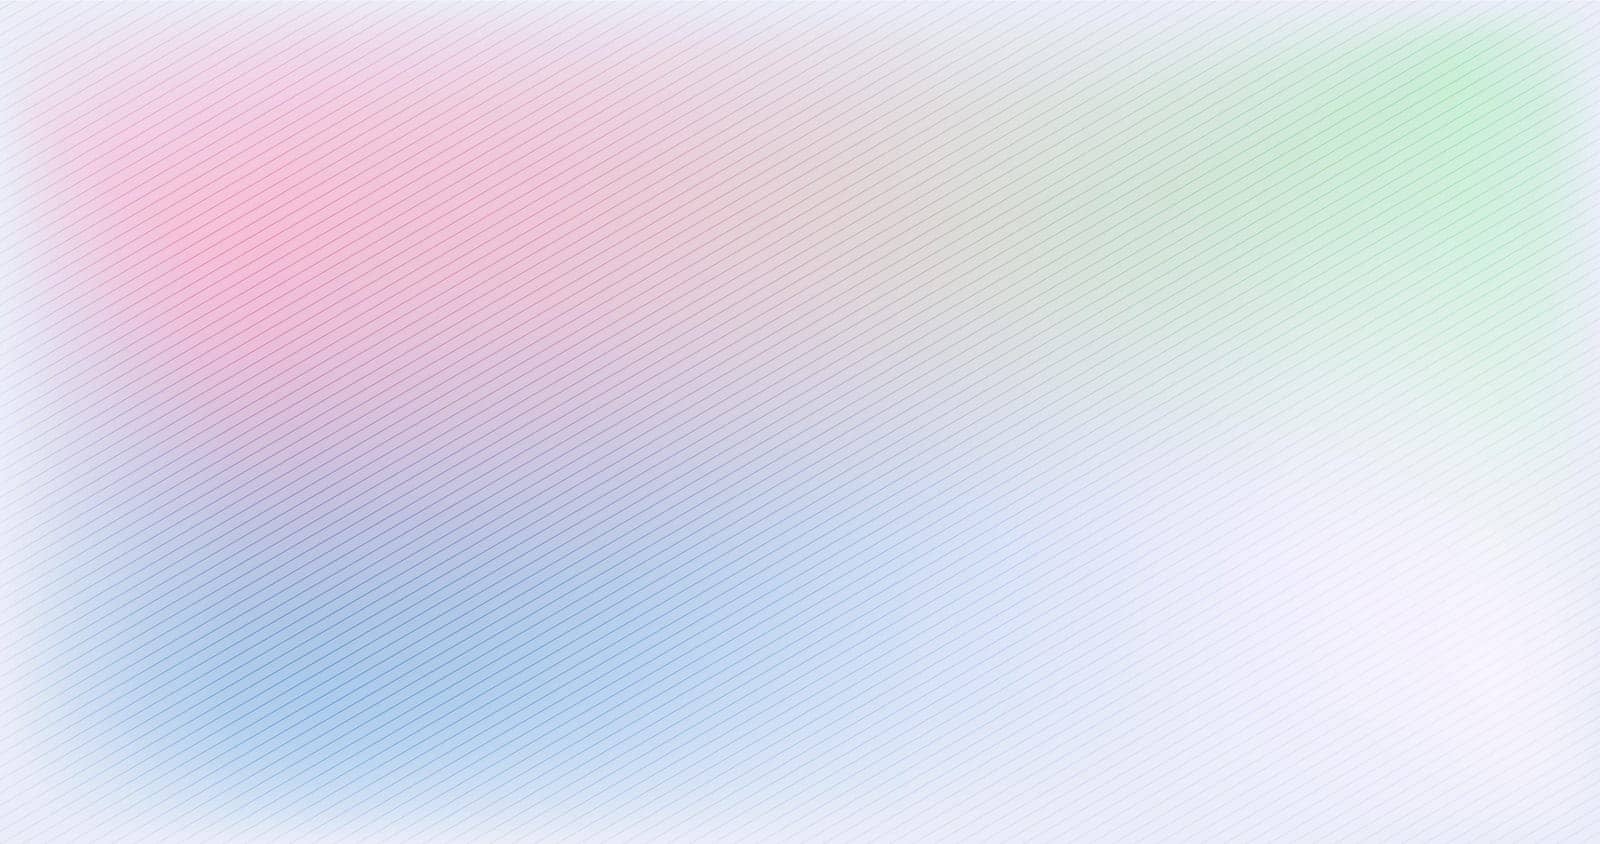 Blurred red green and blue elegant striped background, soft diagonal stripes. Can be used for presentations, brochures and covers.